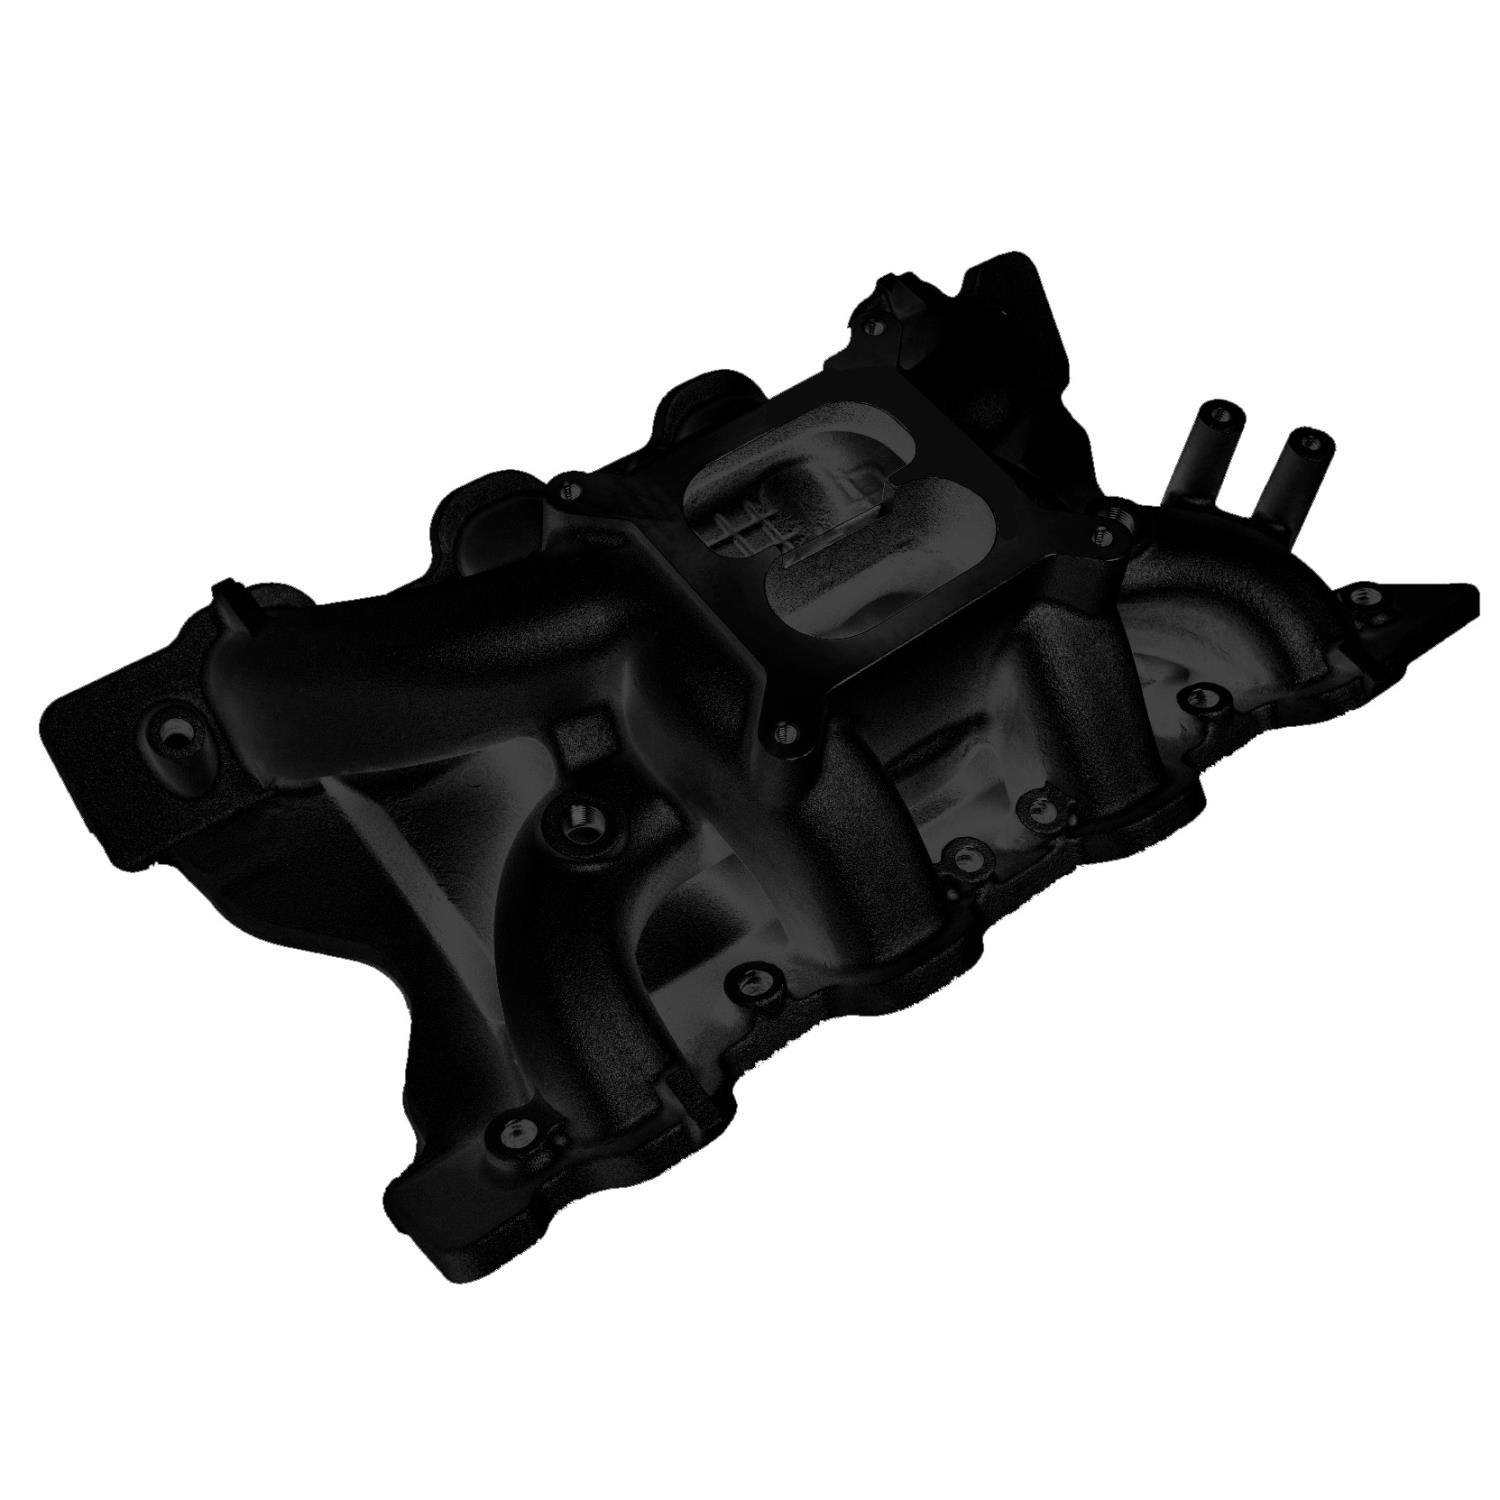 Aluminum Cooling Gap Dual-Plane Intake Manifold for 1970-1986 Ford 351 Cleveland [Black]